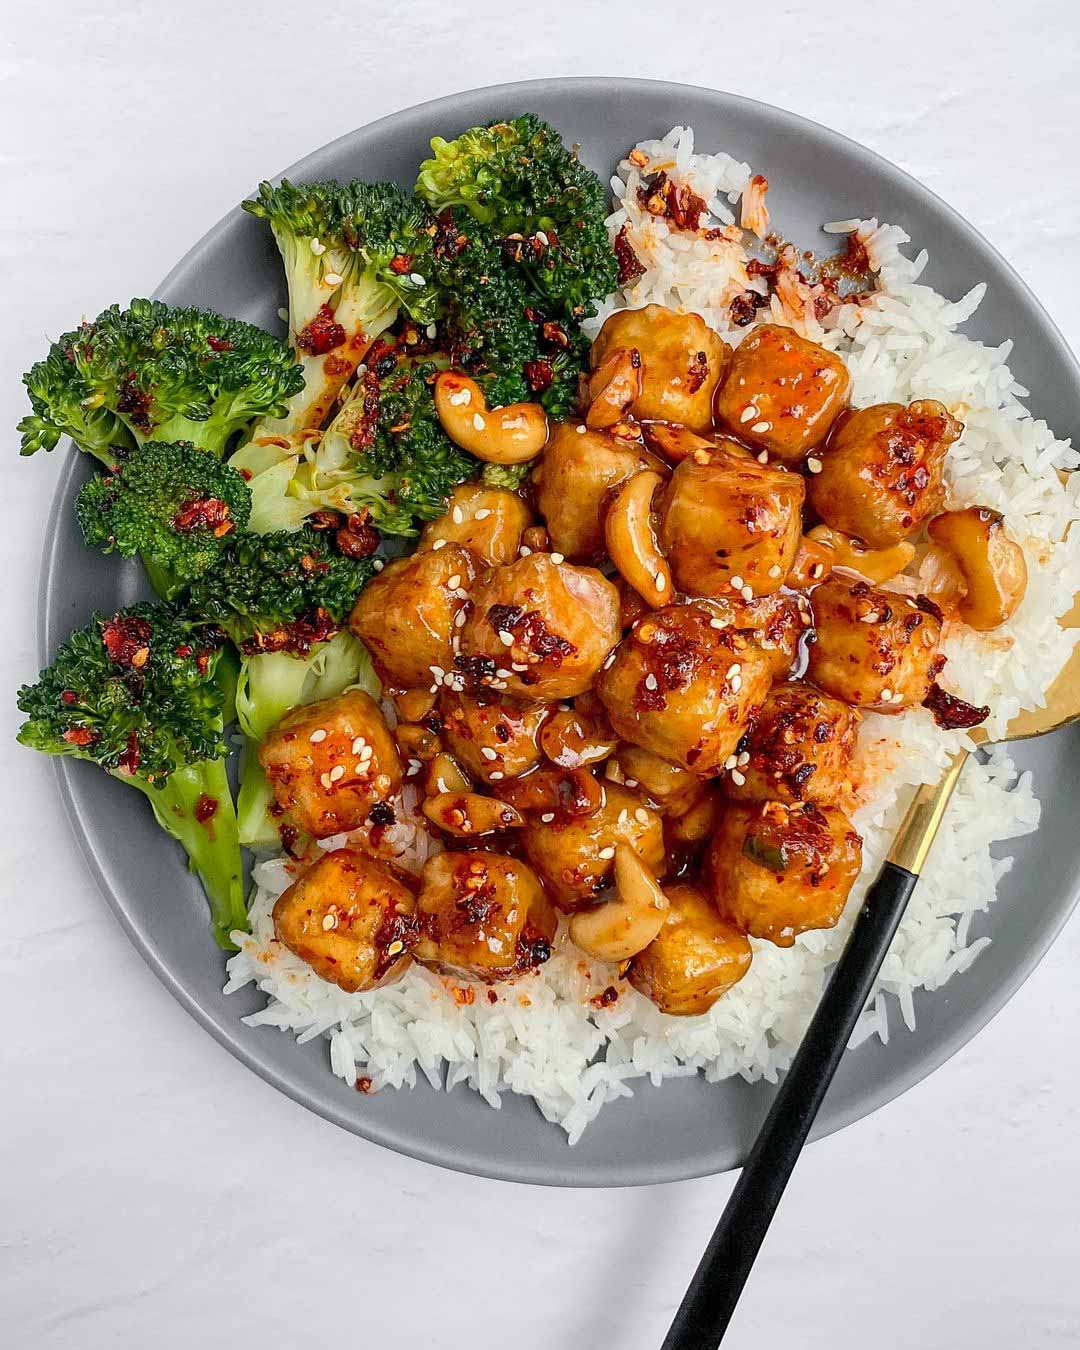 Sticky Cashew Tofu recipe served on a plate with rice and broccoli.